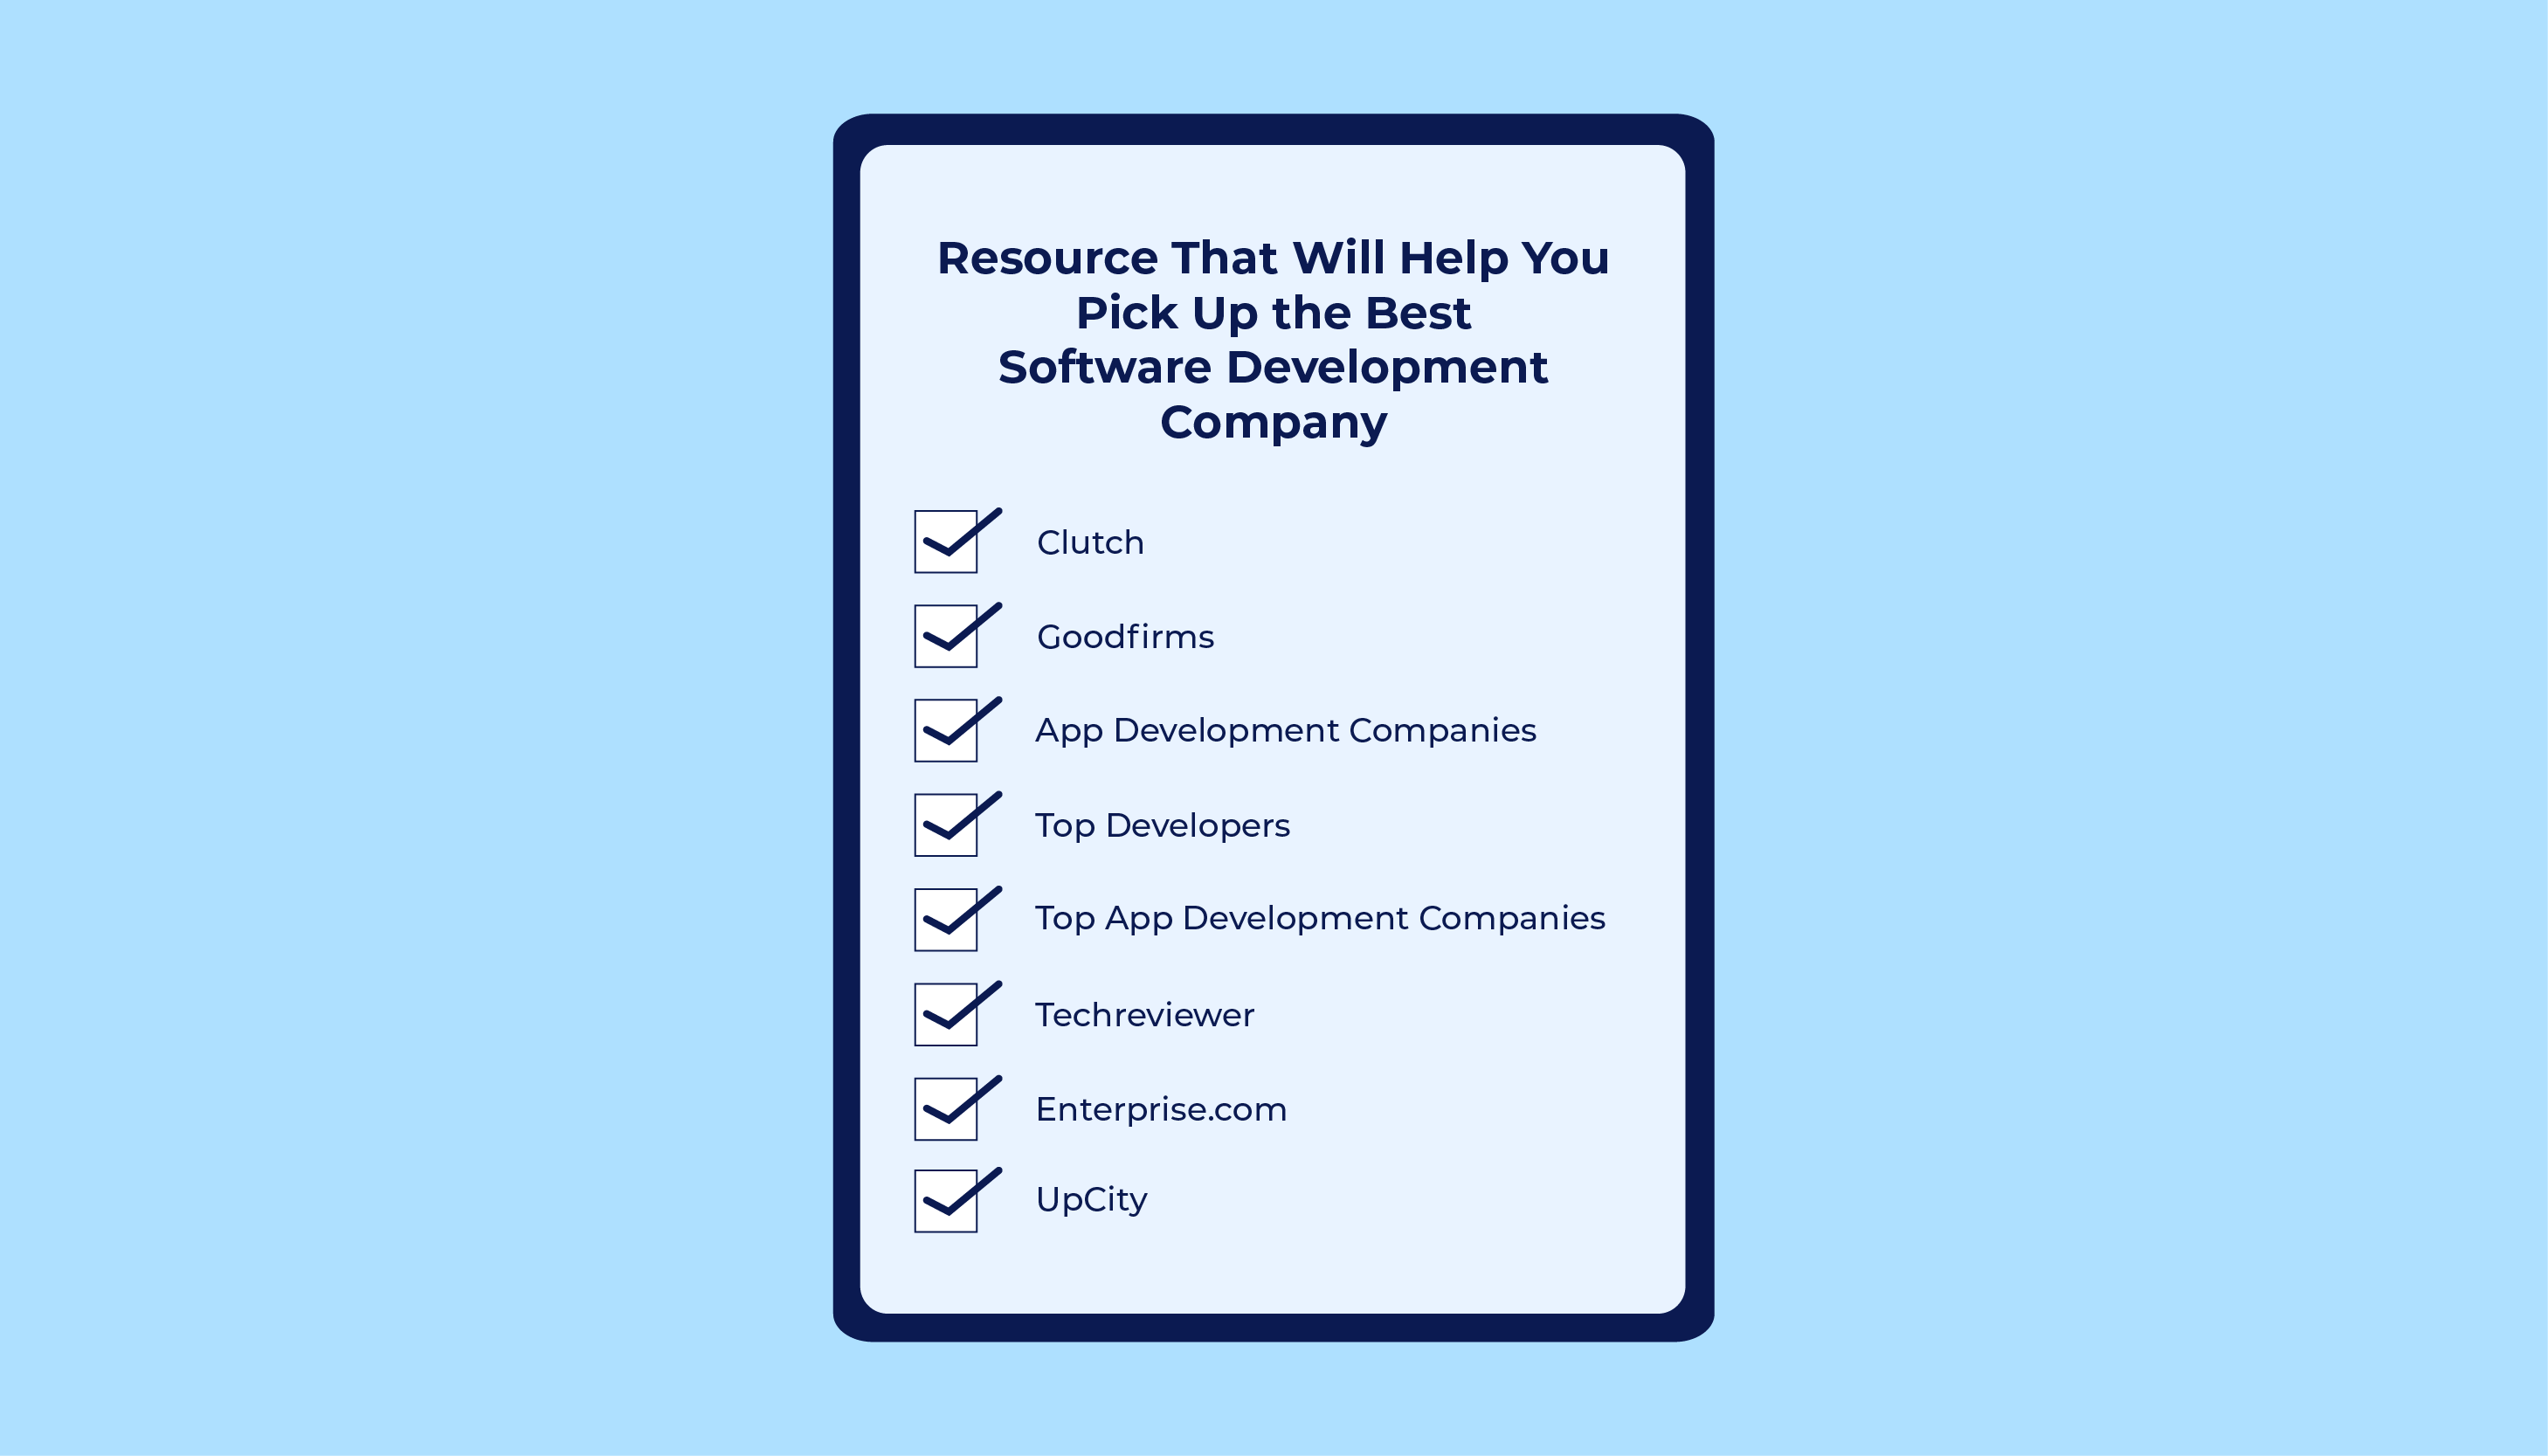 Resources that will help you choosing the right software development company | LITSLINK Blog